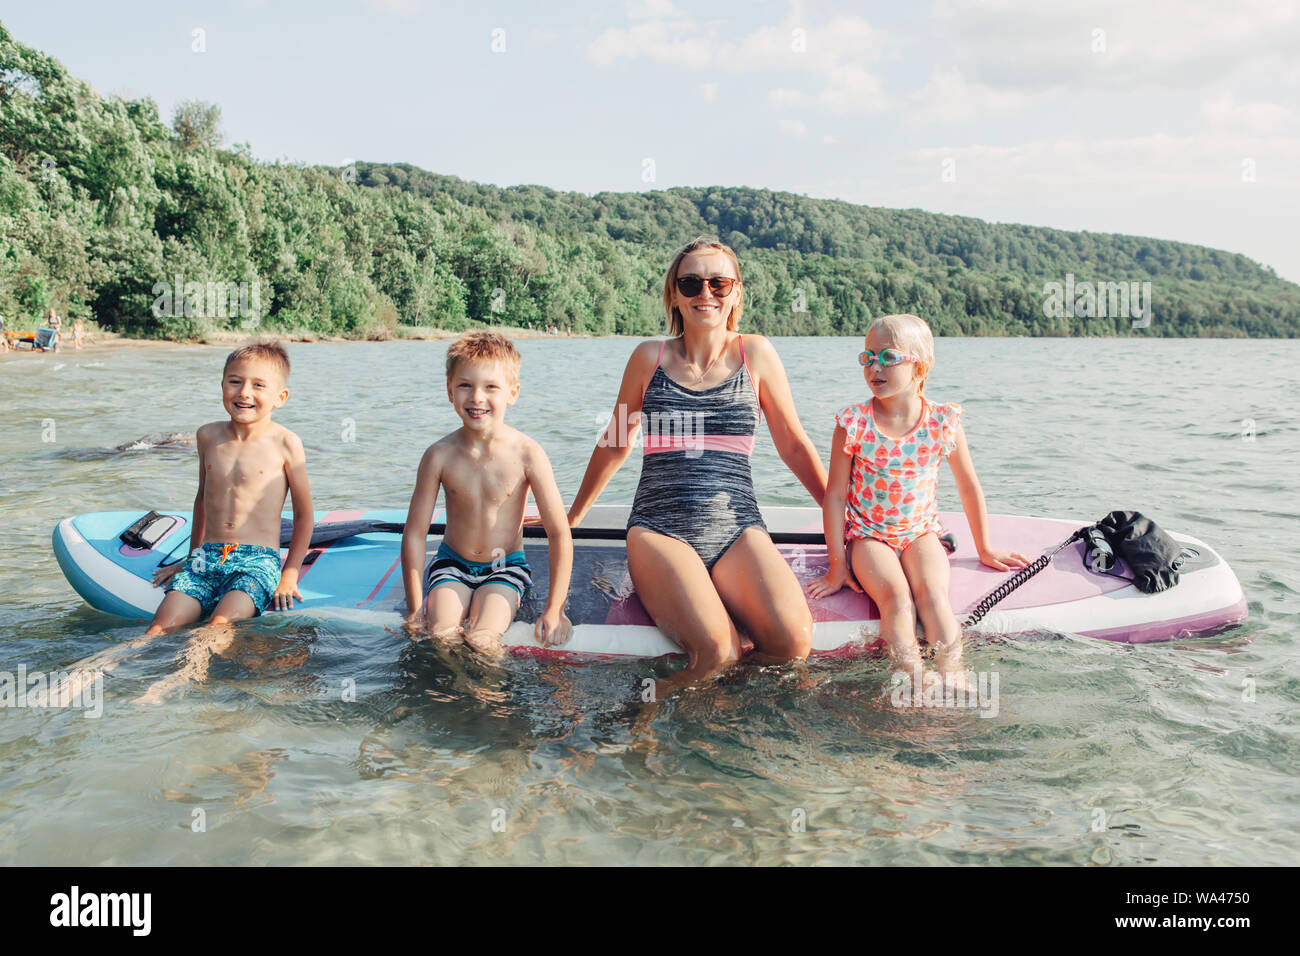 Caucasian woman parent sitting on paddle sup surfboard in water with kids children. Modern outdoor family activity. Summer aquatic activity Stock Photo